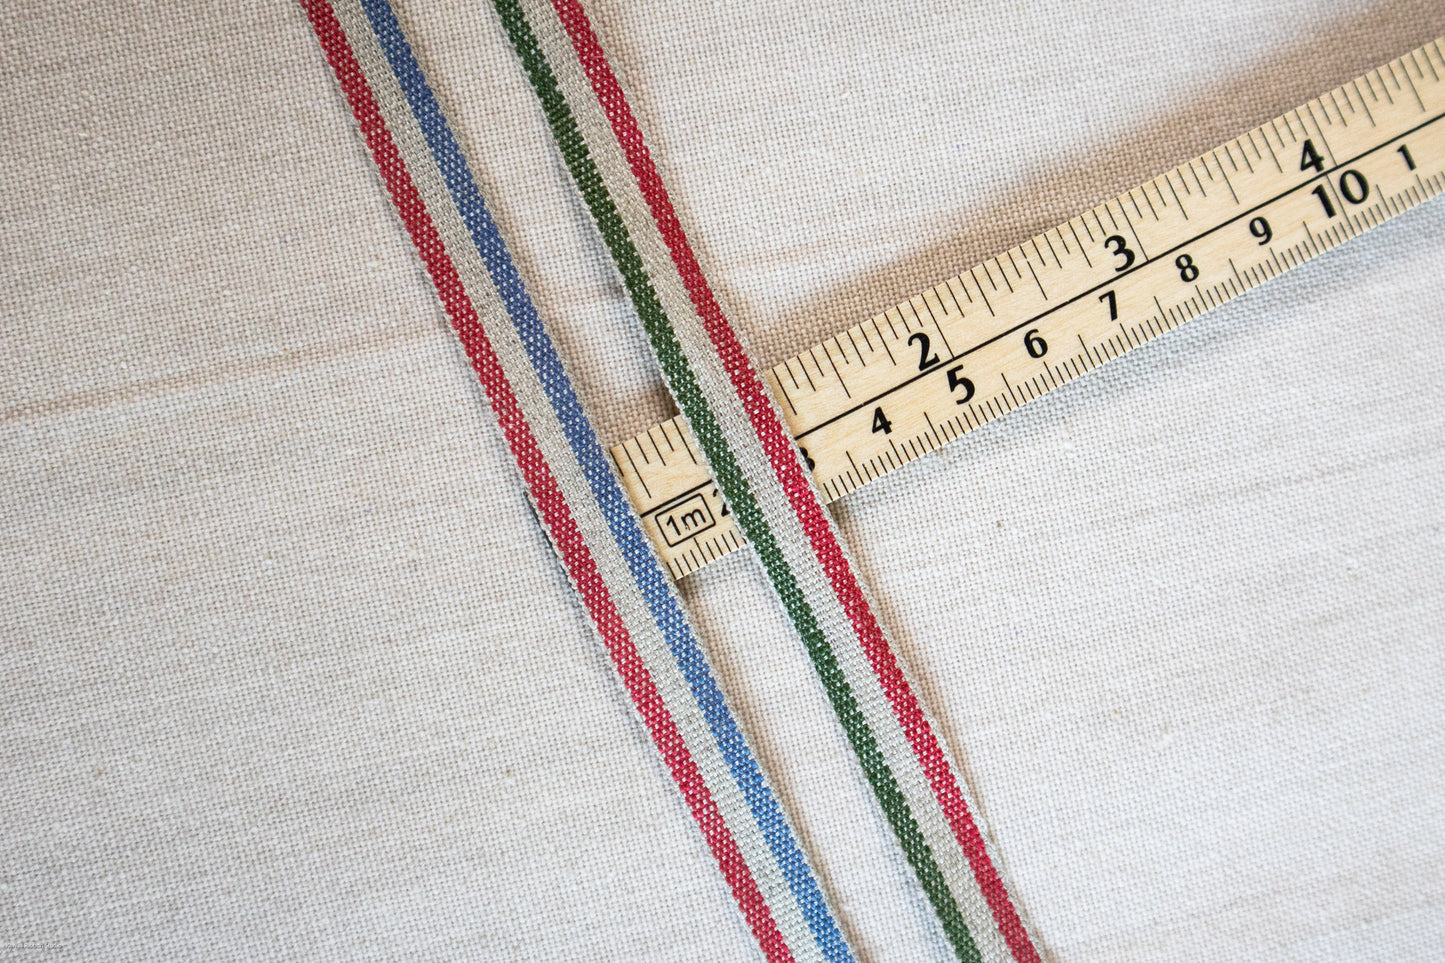 Tricolour ribbon/ tape in 100% washed linen